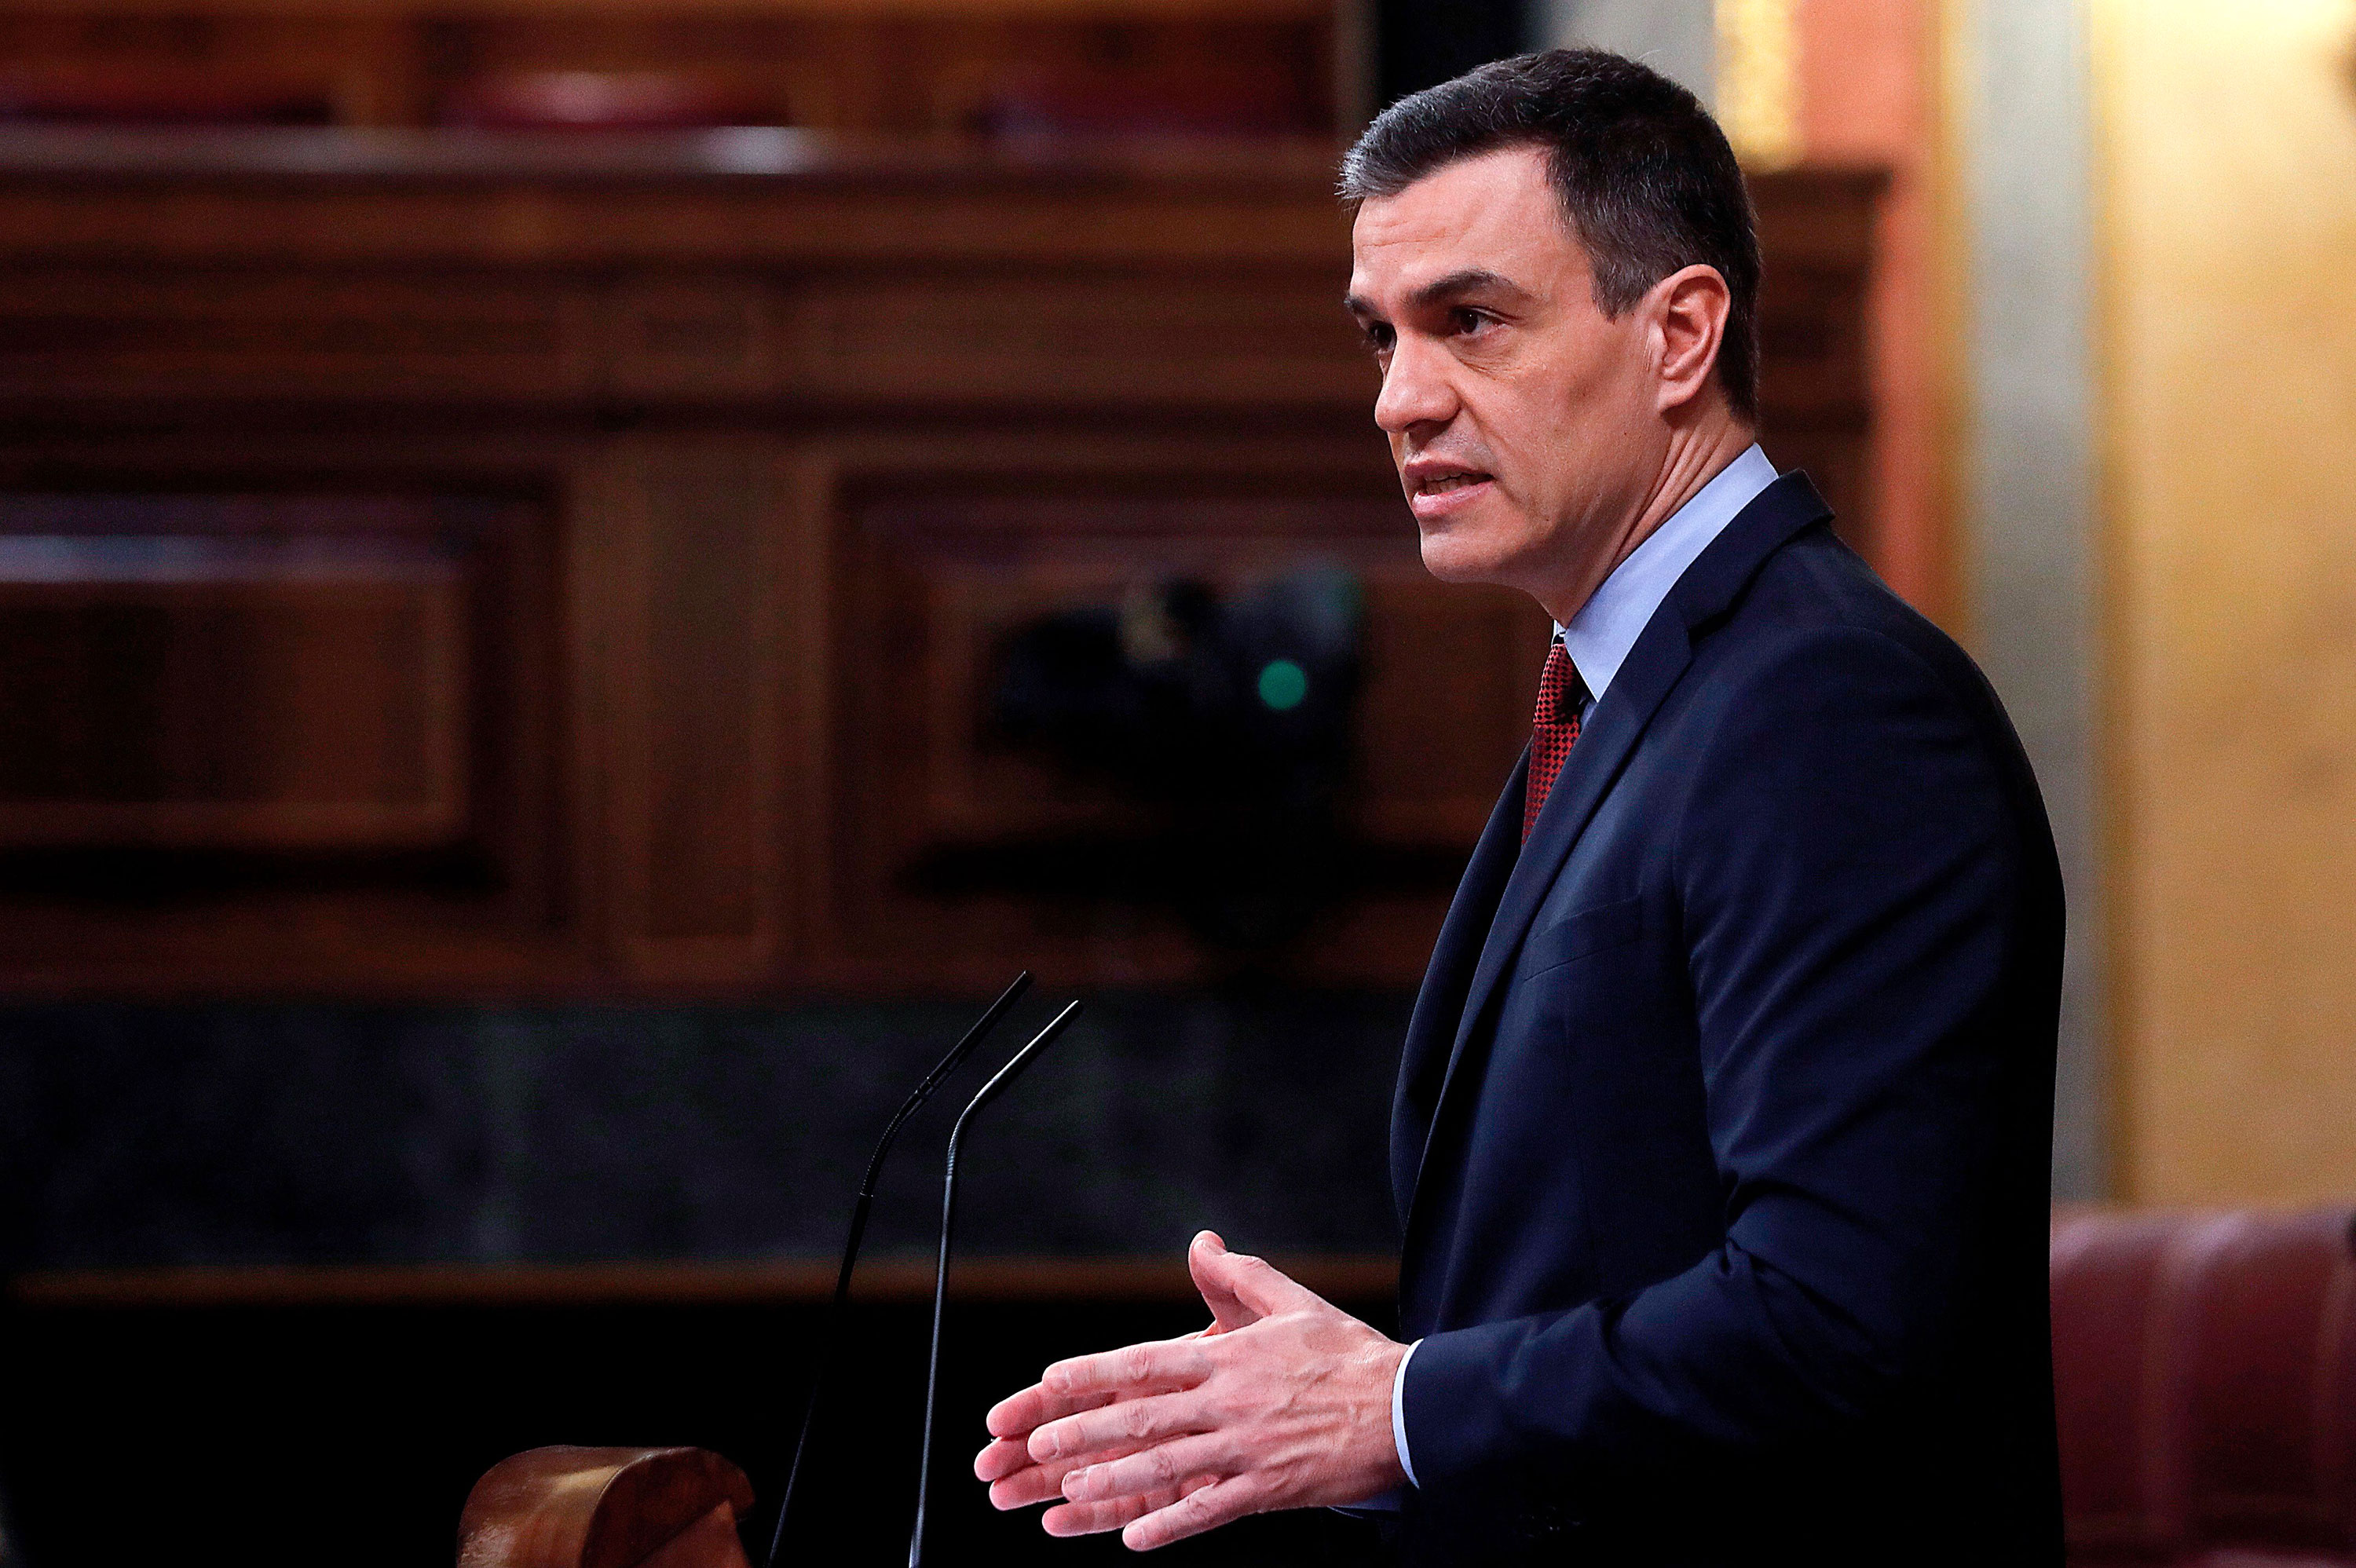 Spanish Prime Minister Pedro Sánchez delivers a speech during a session at Spanish Parliament in Madrid on April 22.